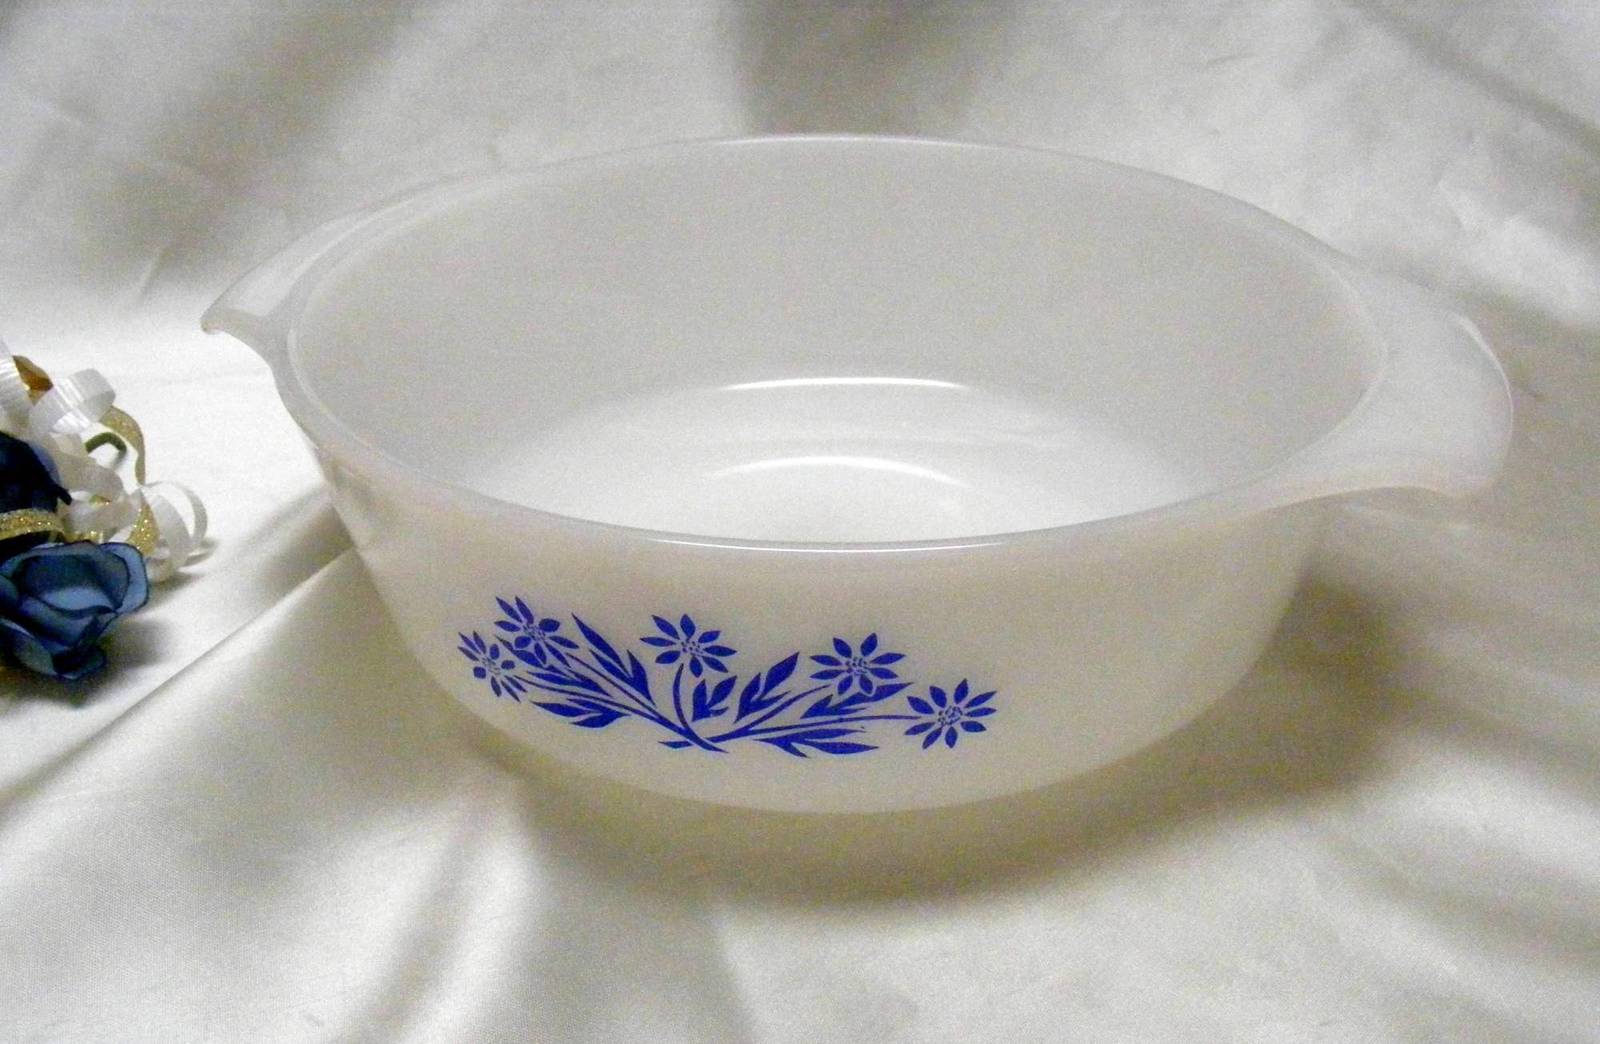 Primary image for 1809 Anchor Hocking Fire King Blue Corn Flower Casserole Dish